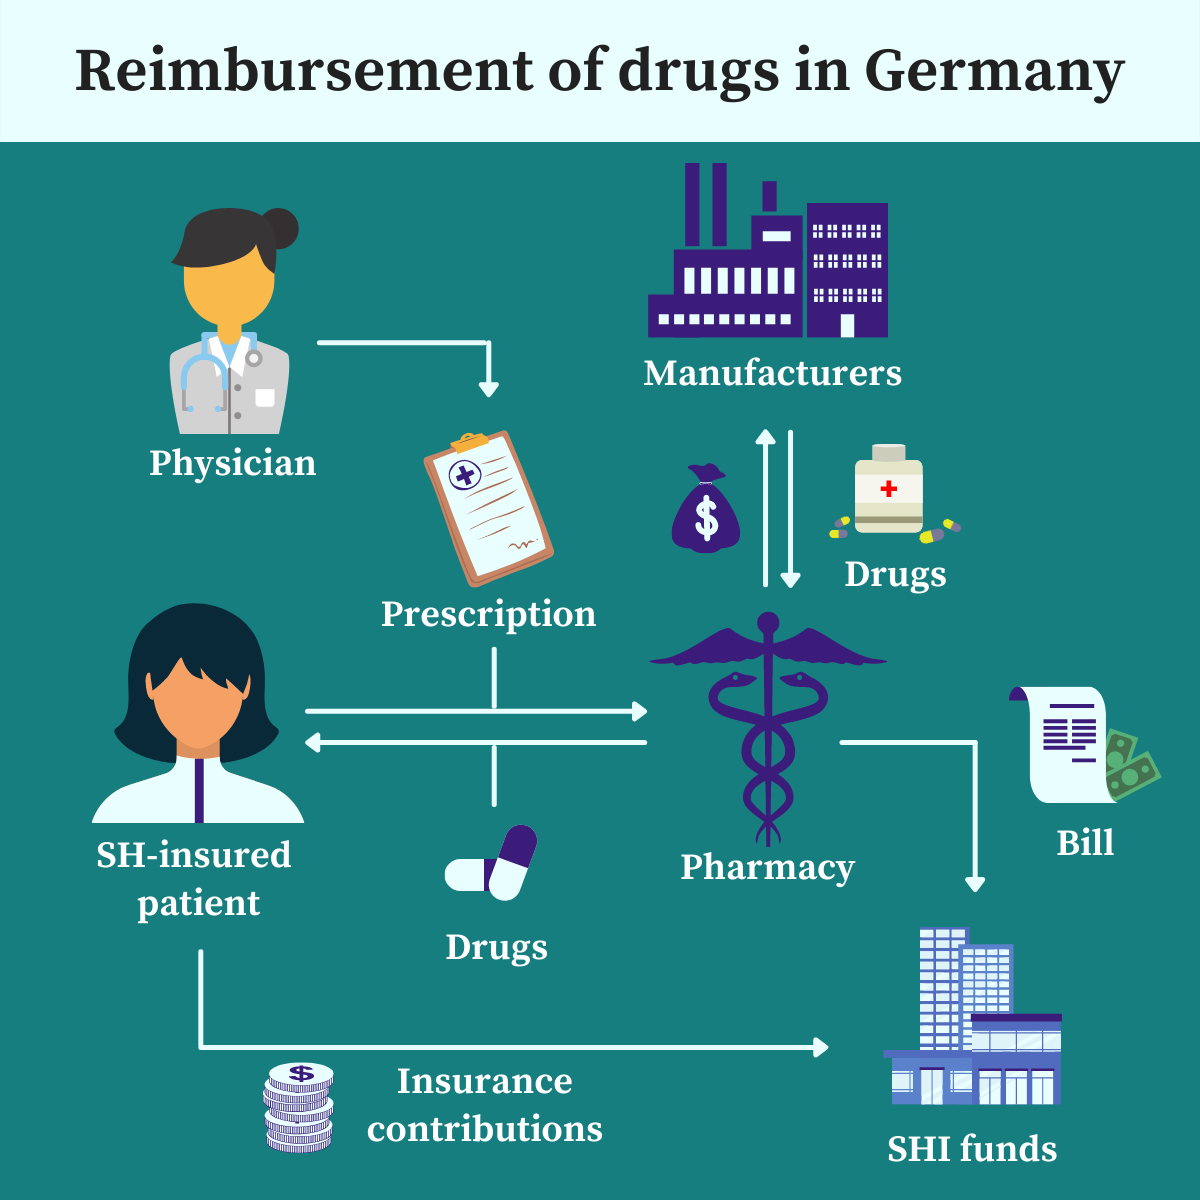 are-you-interested-in-drug-reimbursement-in-germany